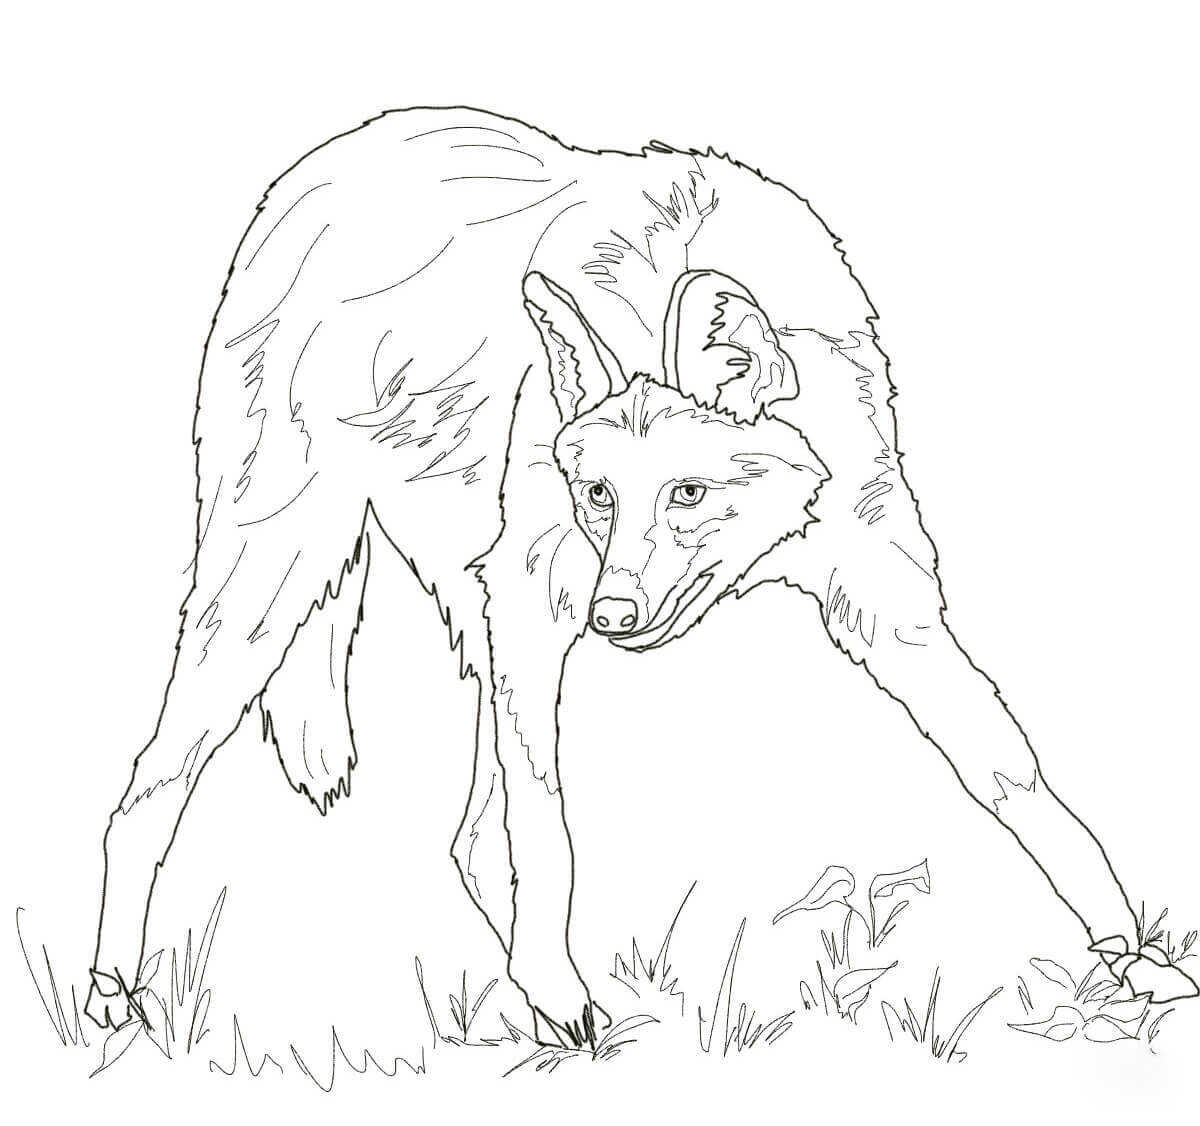 Maned Wolf has long black legs and tall, erect ears Coloring Pages